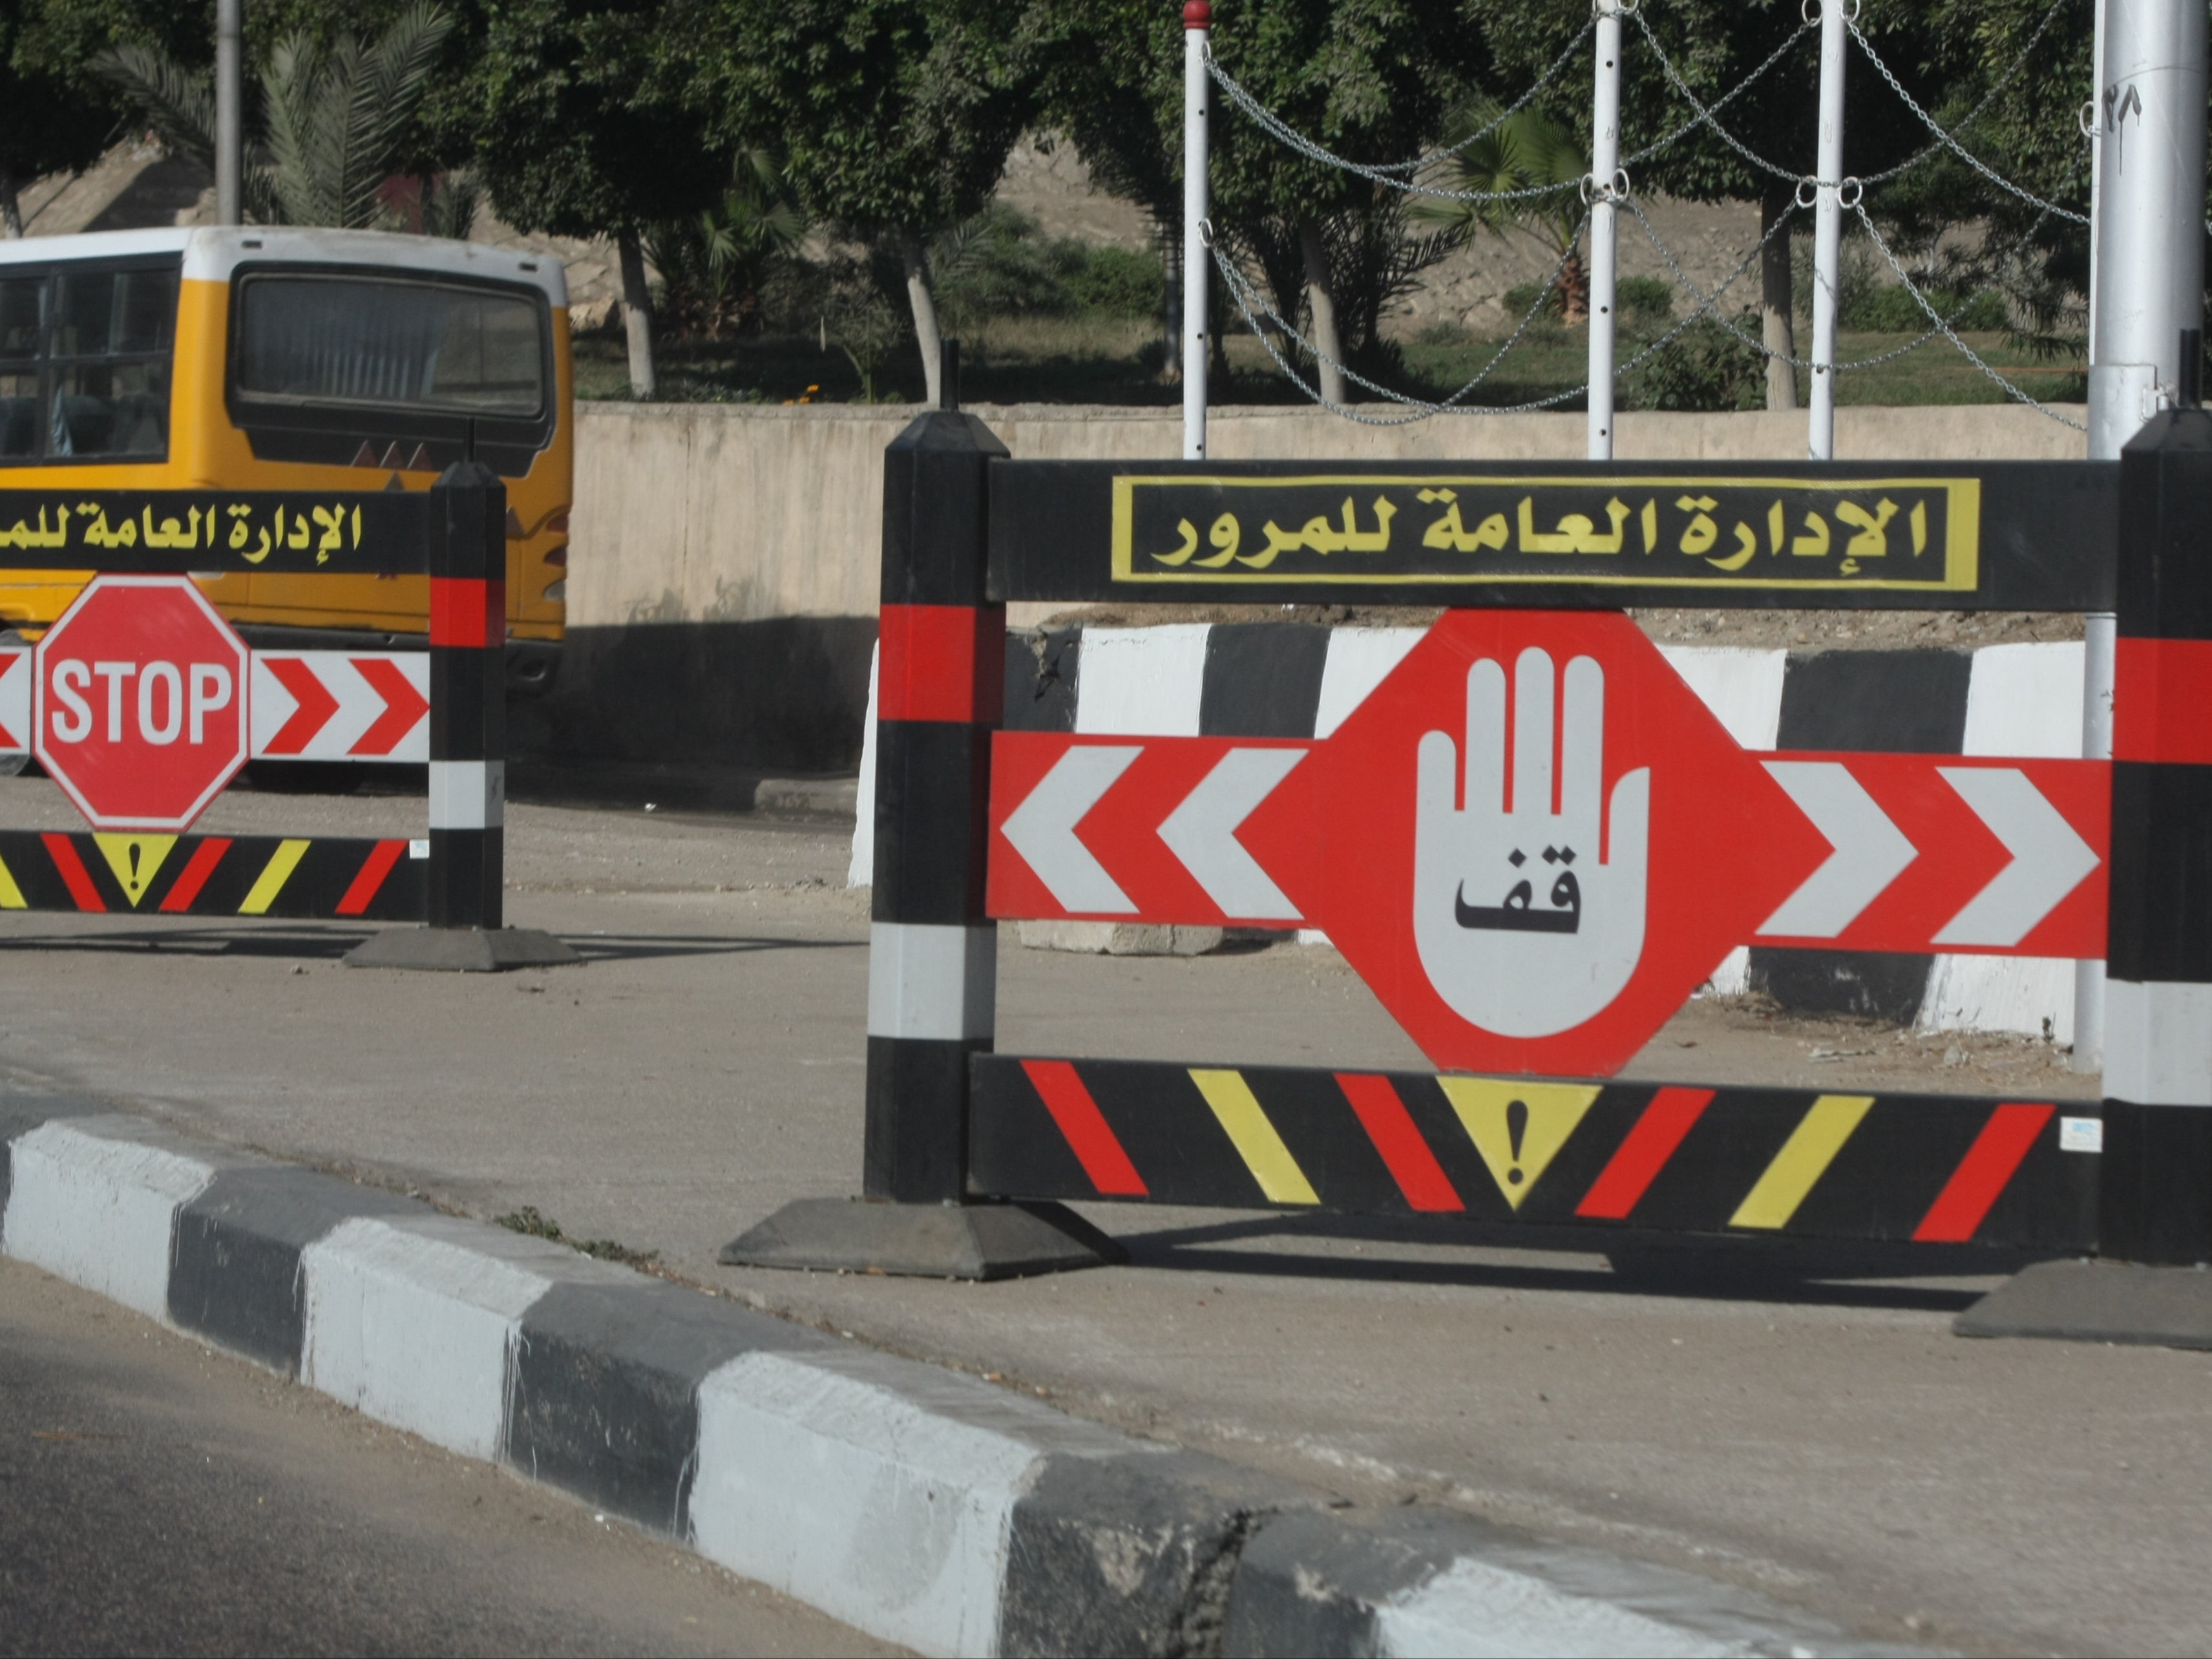 Danger zone? Security checkpoint in Egypt